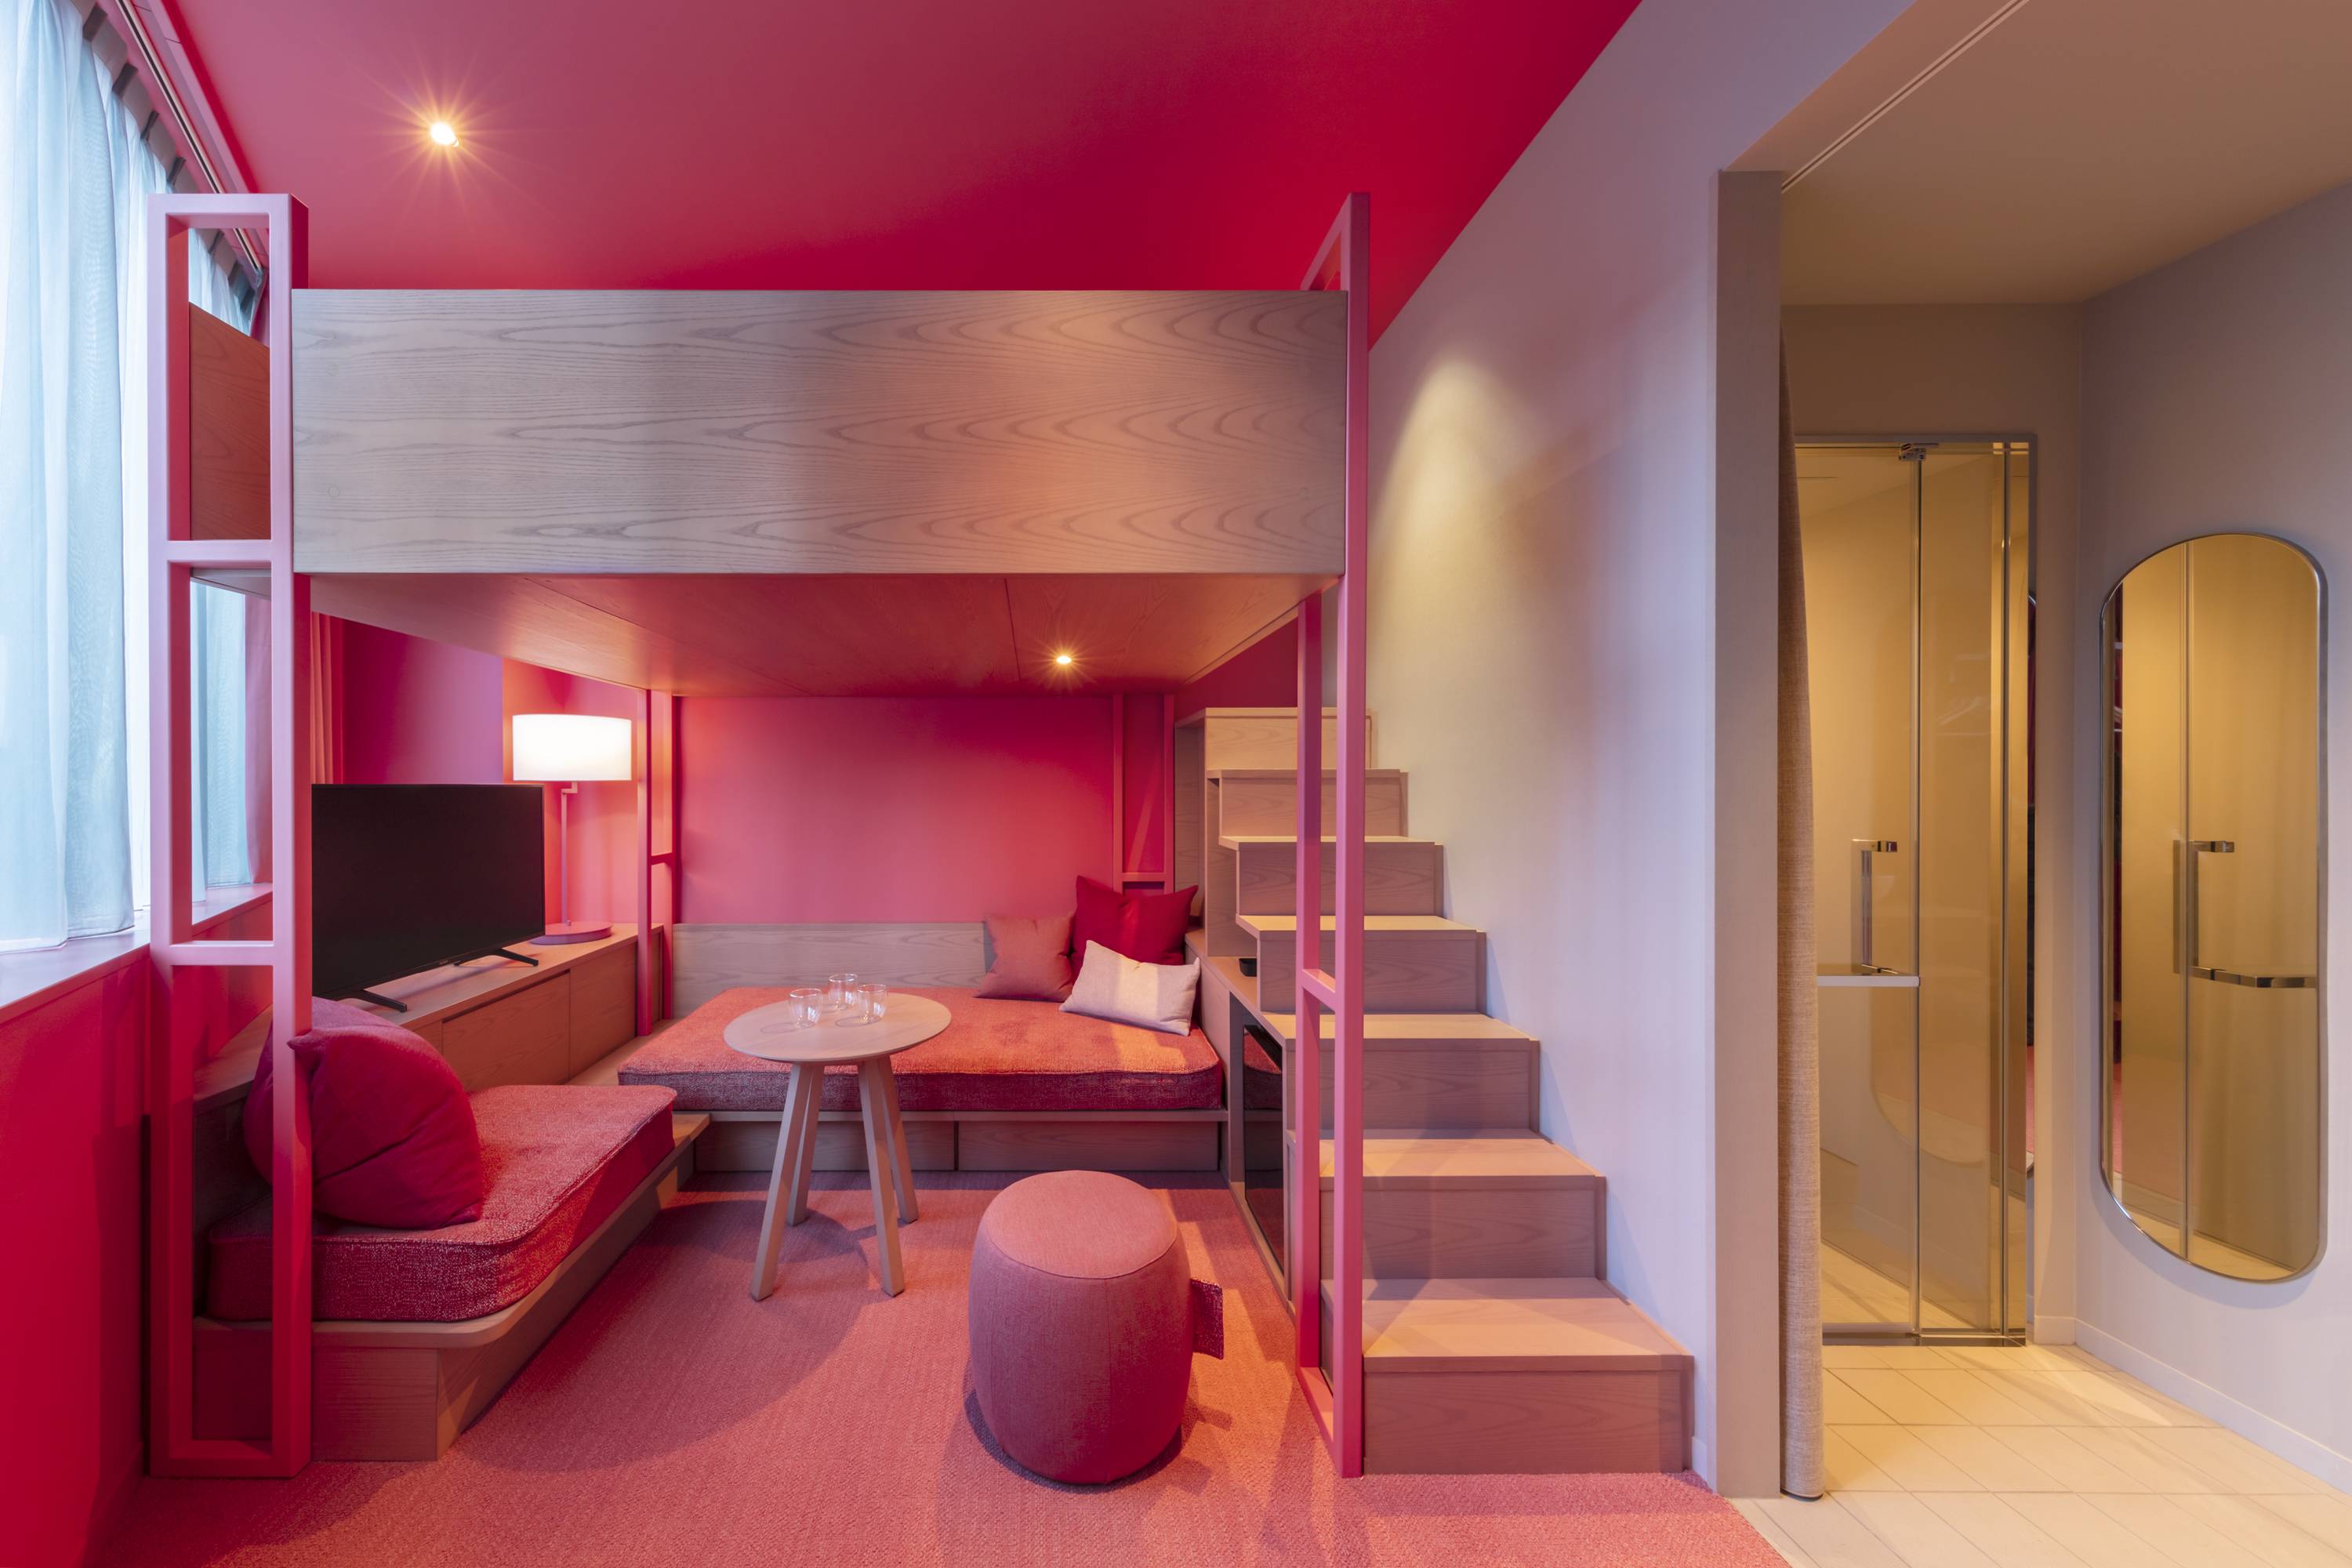 Toggle Hotel’s rooms are two-tone, each with furniture matching the bicolor palette.